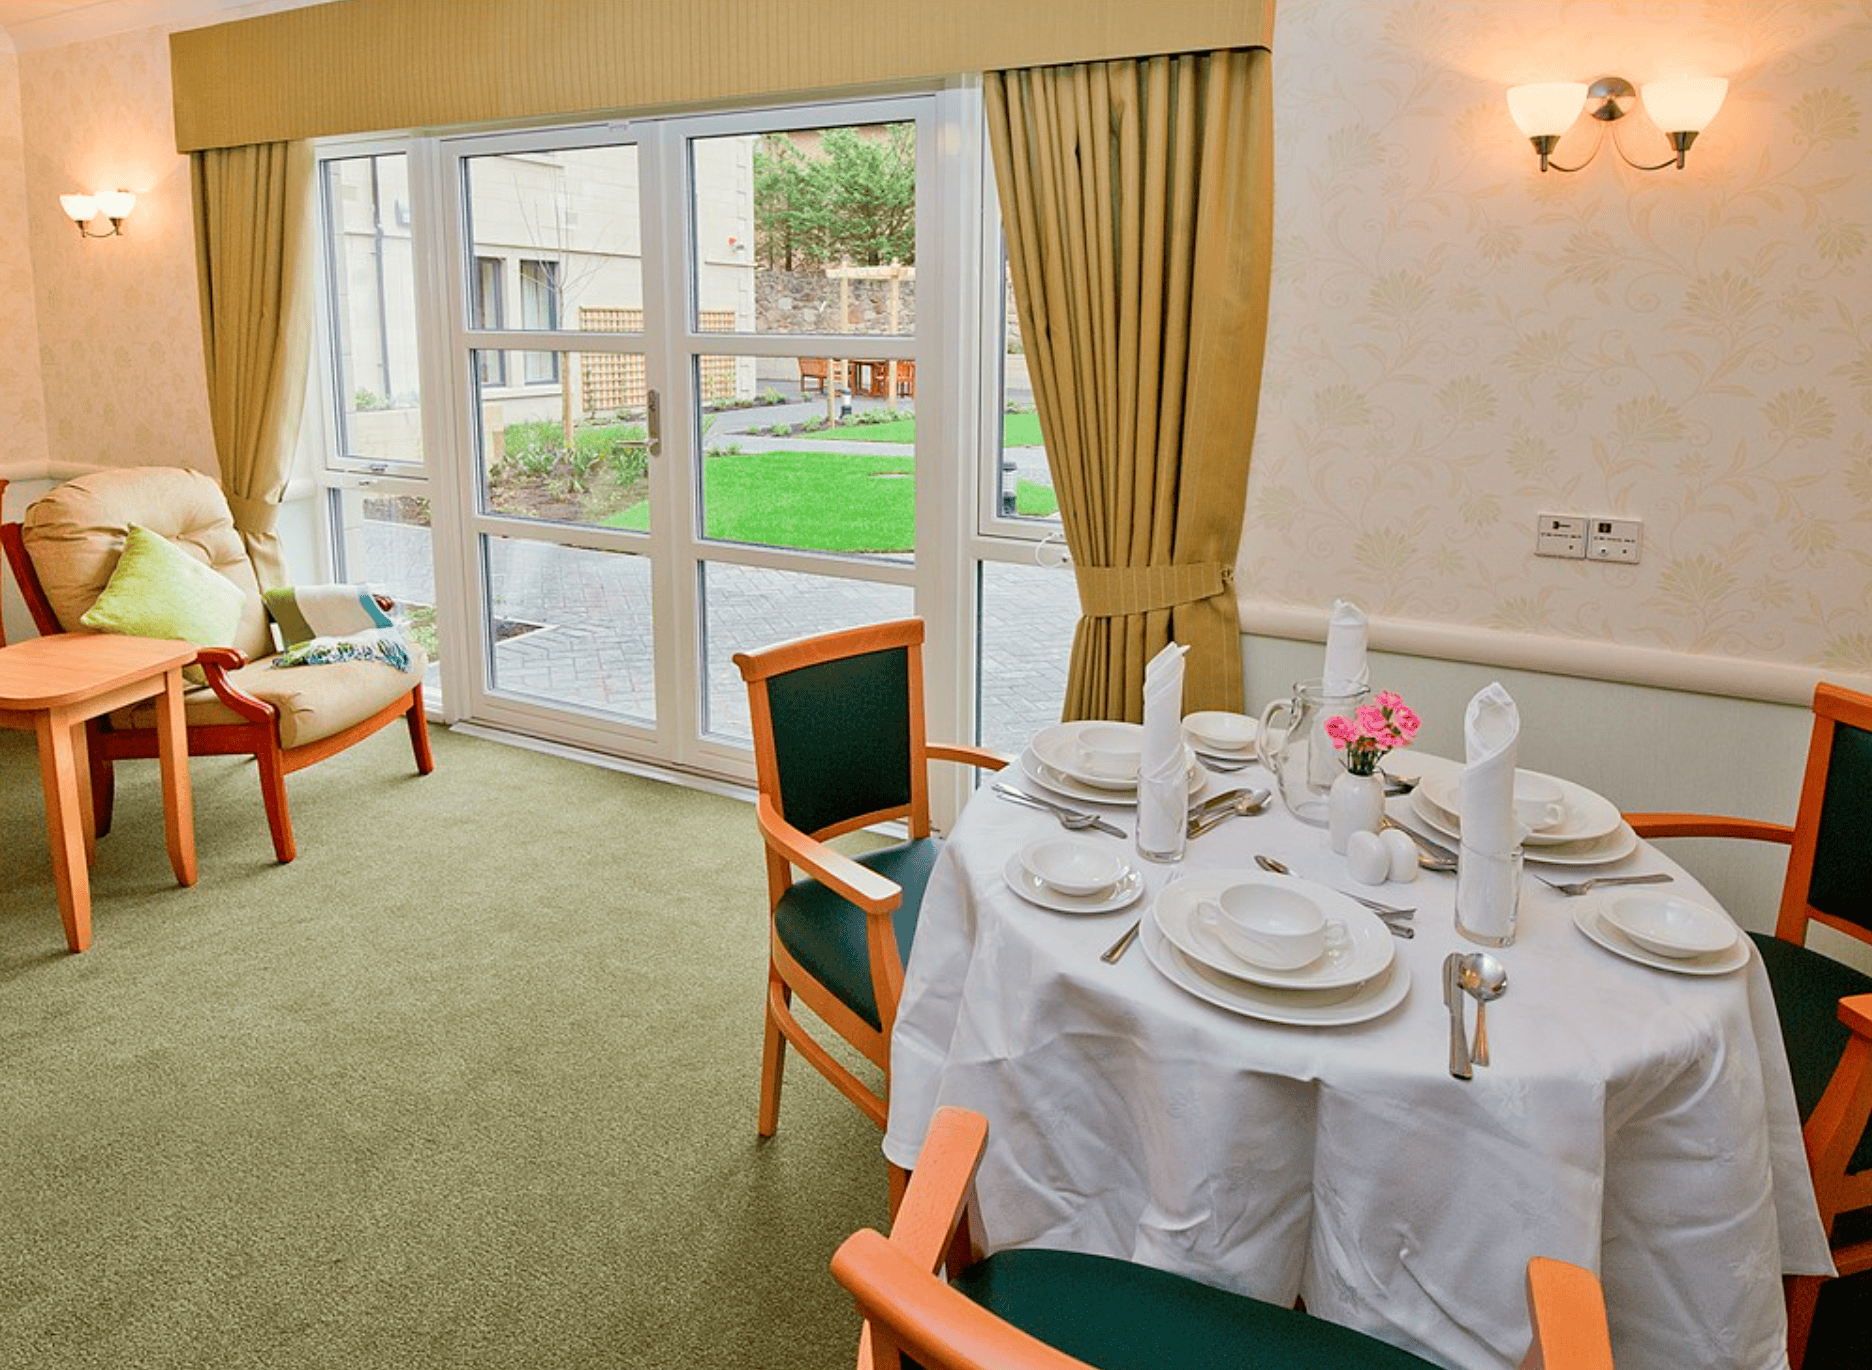 Dining Area at Antonine House Care Home, Bearsden, Glasgow